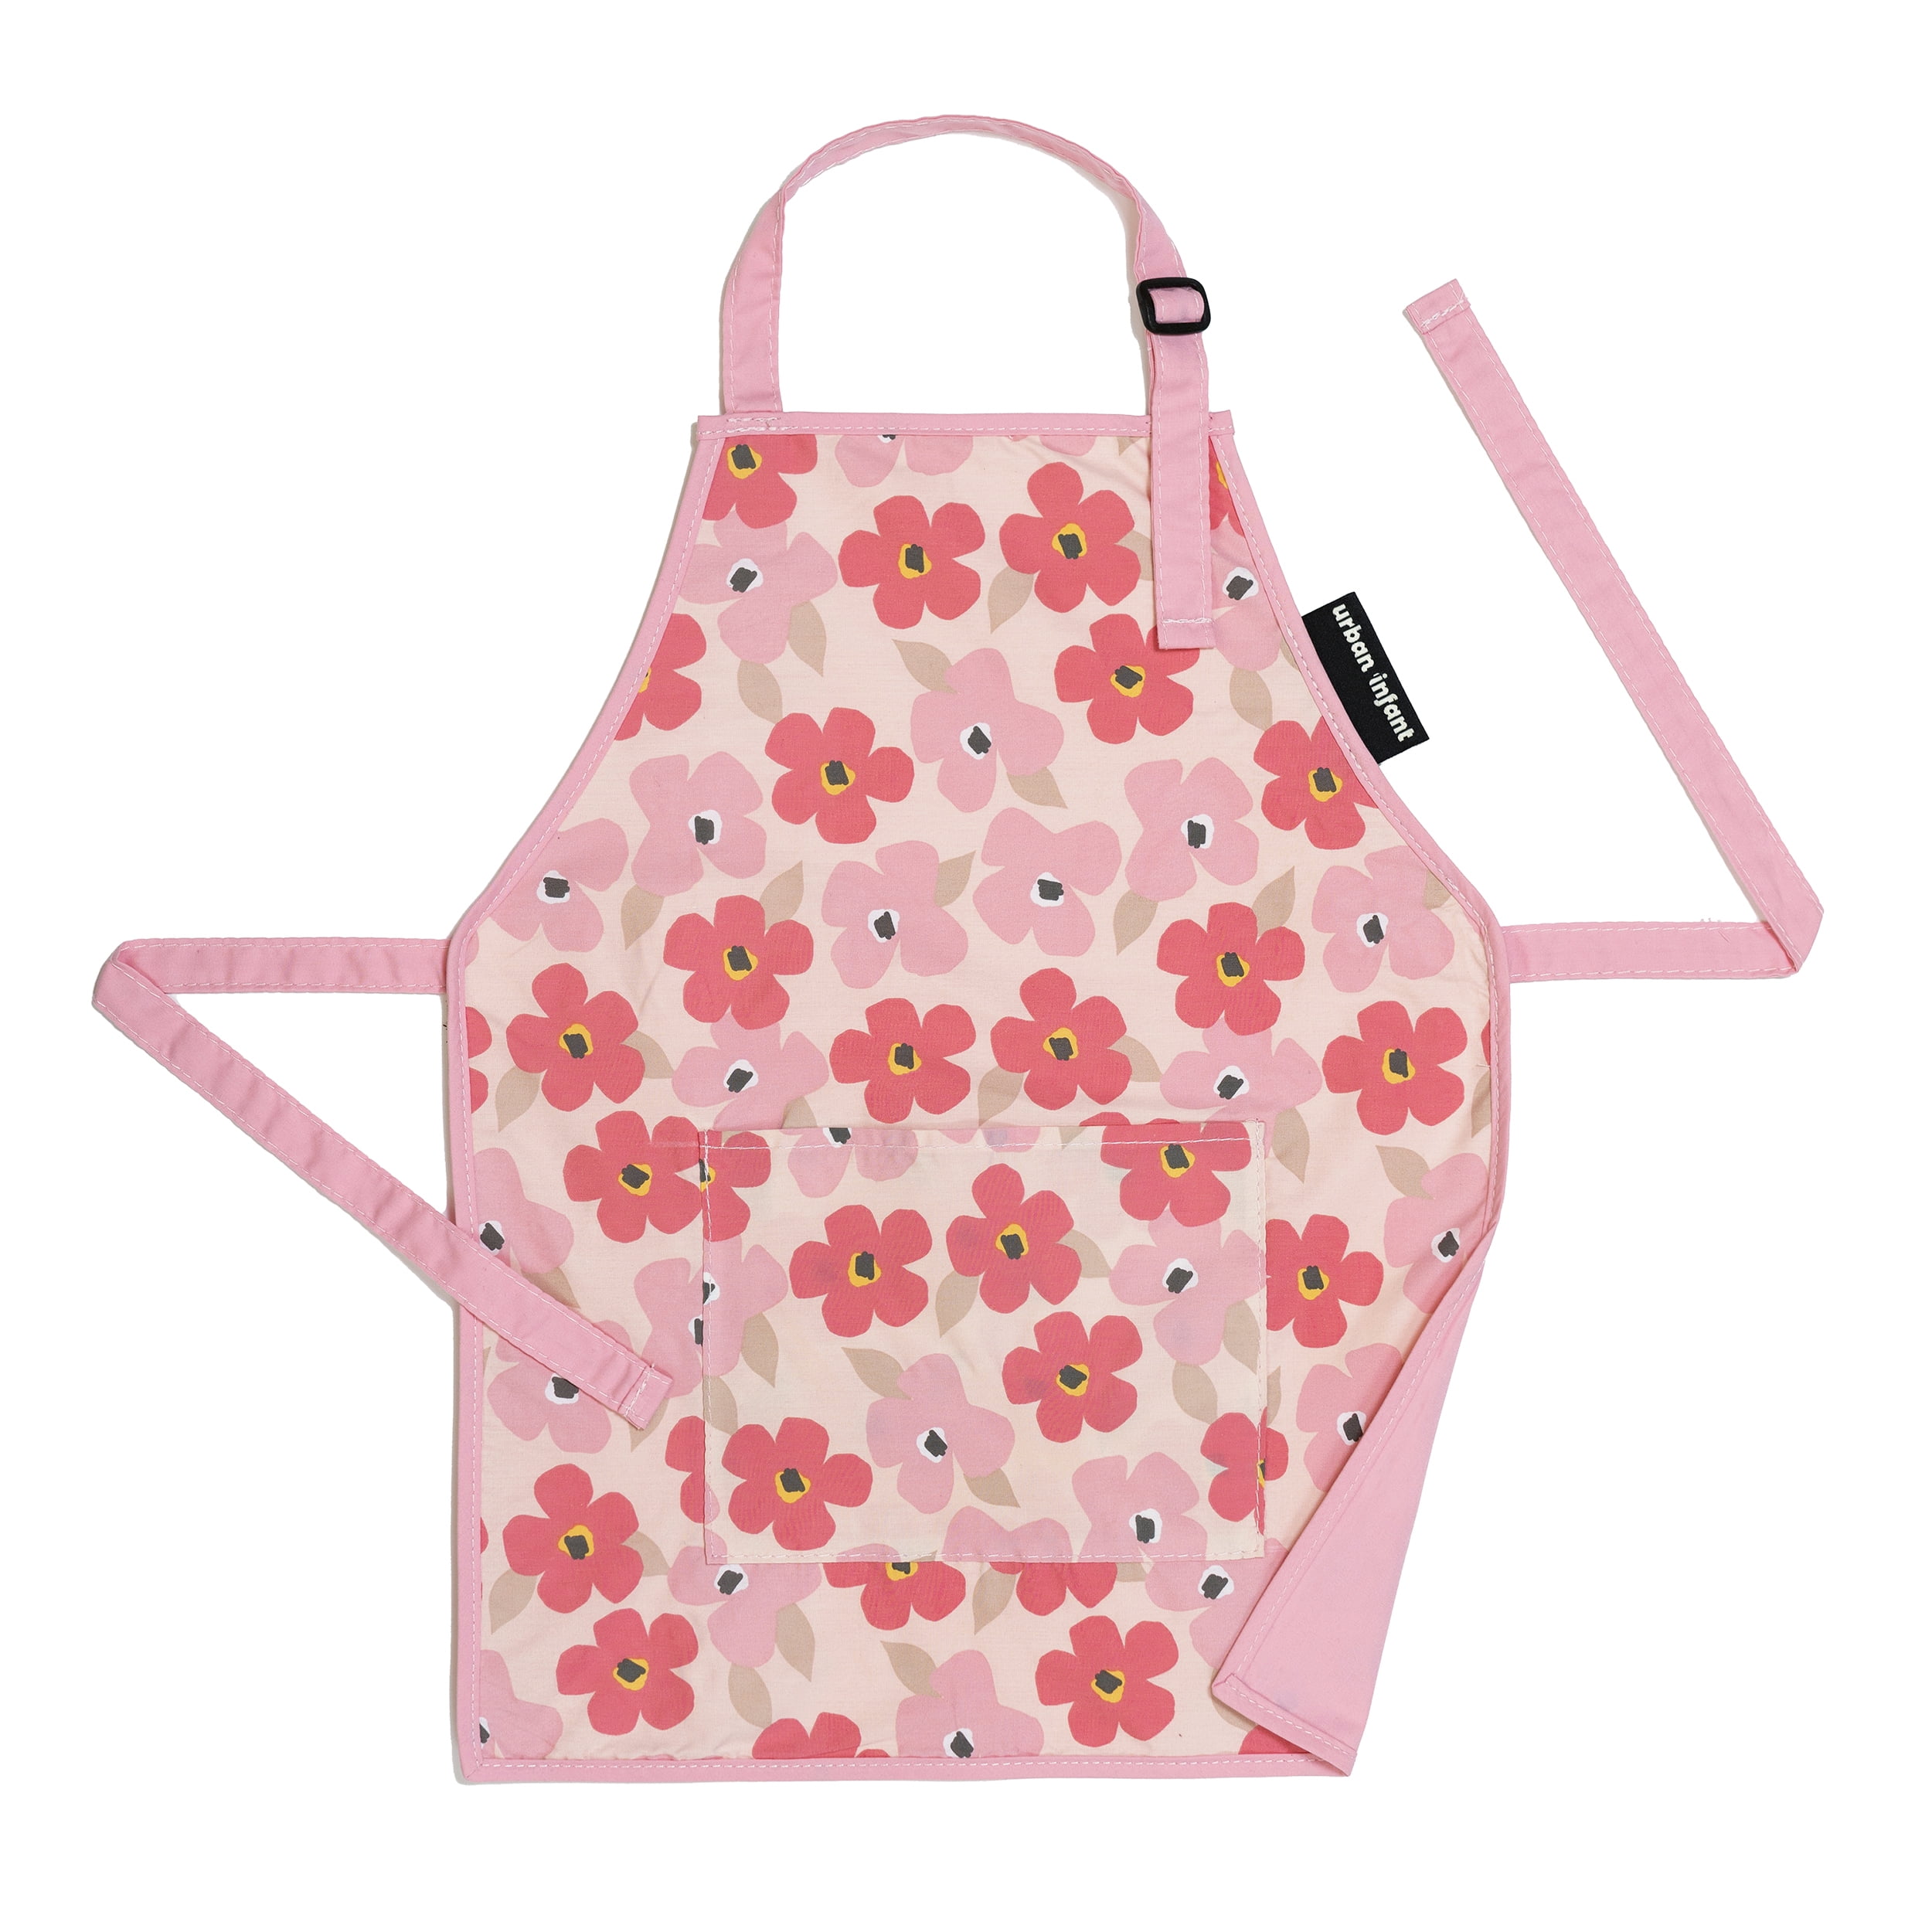  RosieLily Kids Aprons Kids Cooking Apron Girls Apron Toddler  Apron for Girls Cooking Baking Painting Chef Aprons for Kids 3-5 Little Girls  Children Youth Apron Black Cute Donuts: Home & Kitchen